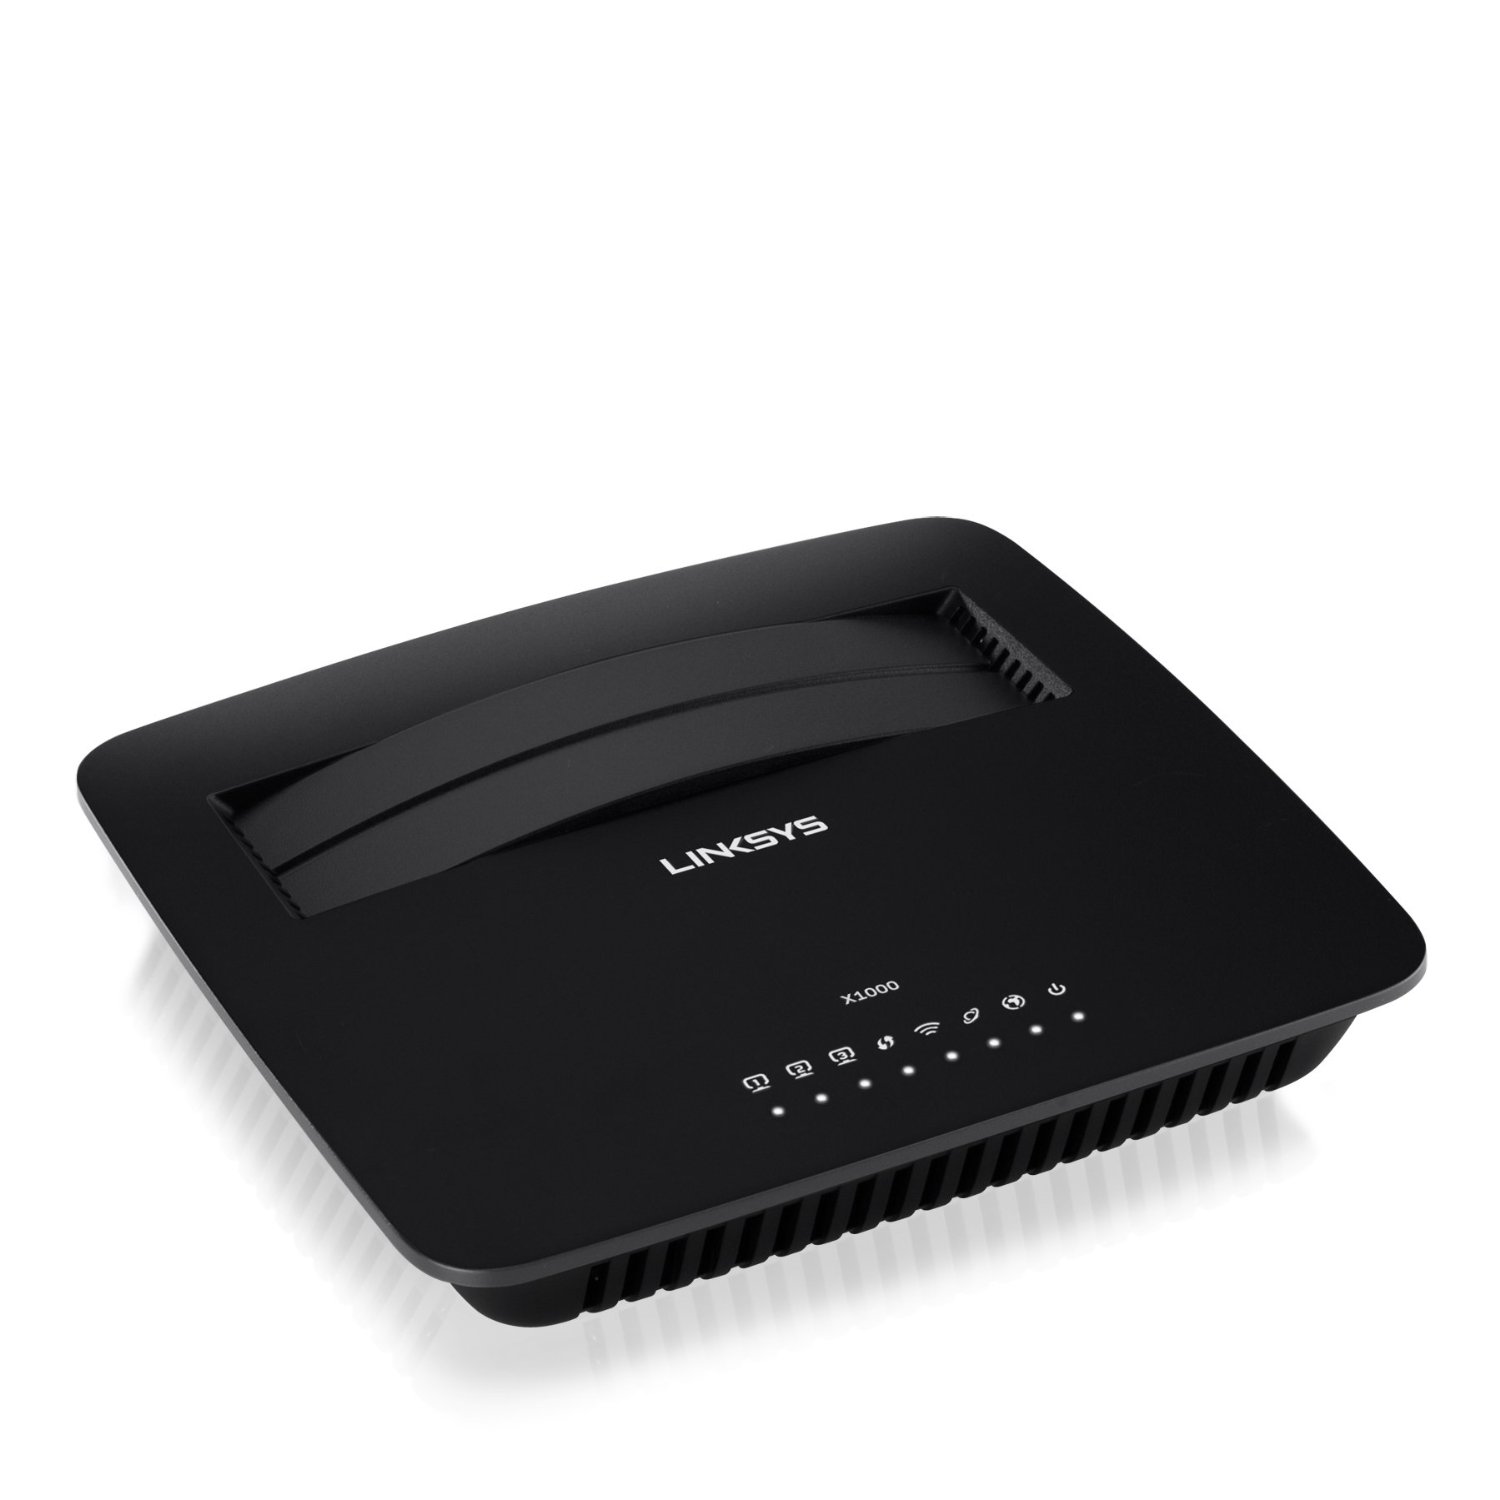 SG :: Linksys X1000 DSL Wireless Router